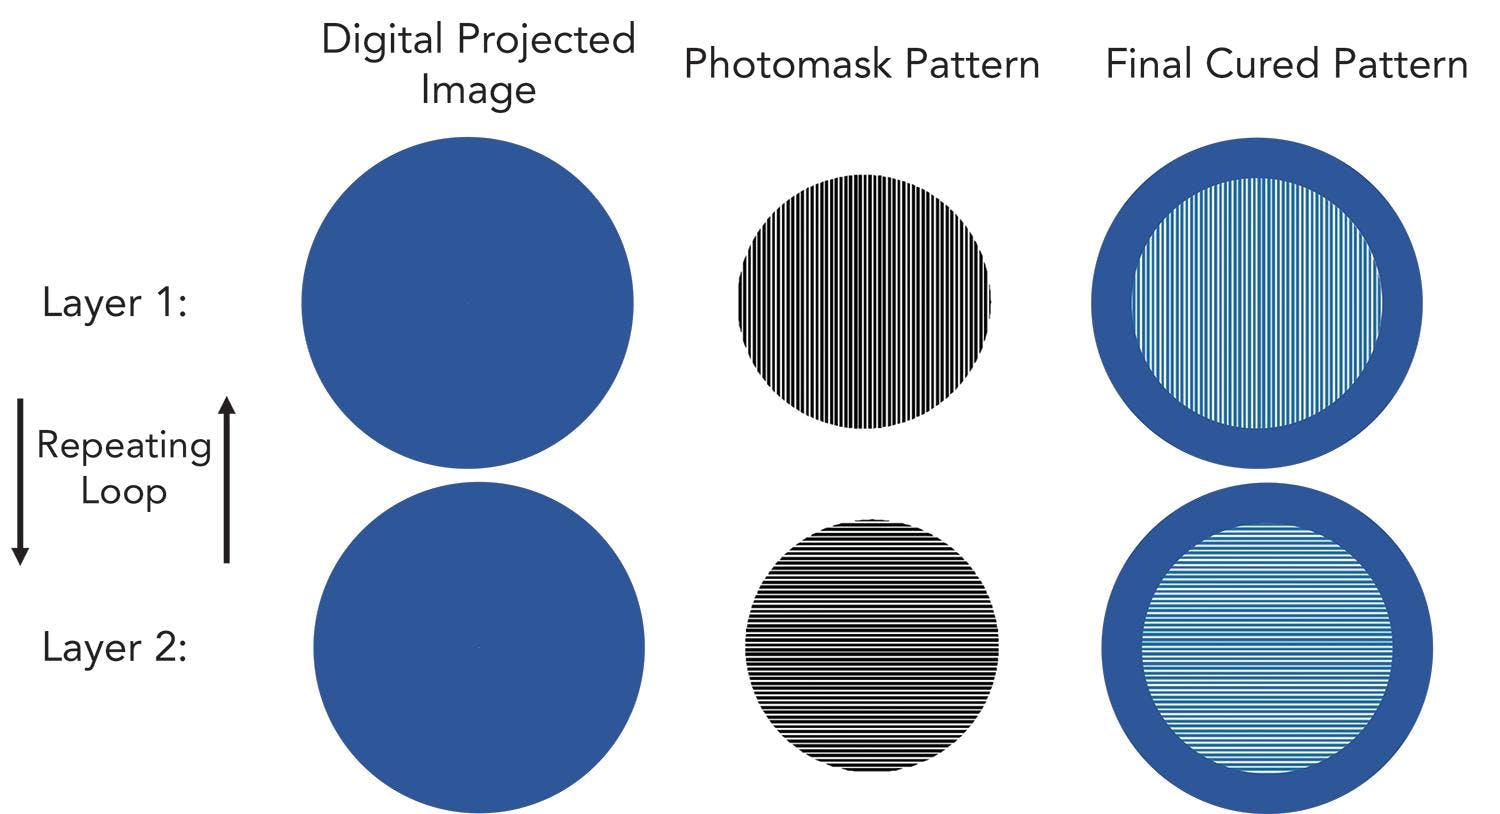 Figure 2: Example of digital and photomask patterns used in HSLA for creating a walled column with a simple cubic grid using two photomask patterns.